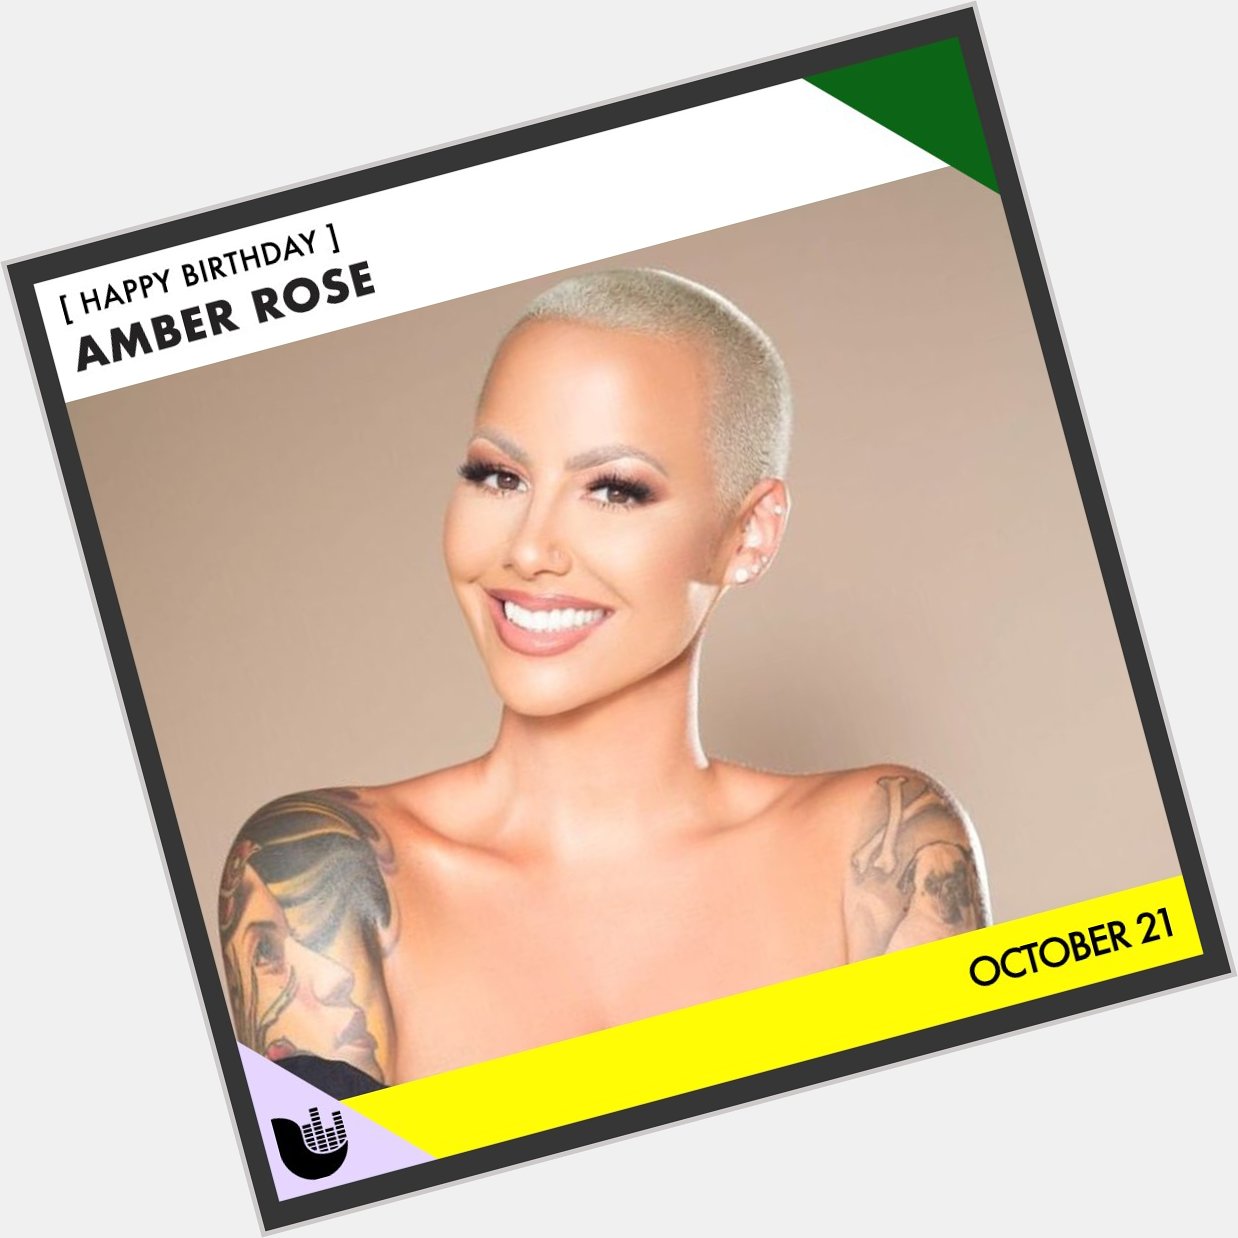 Join us in wishing a happy birthday to Amber Rose! 